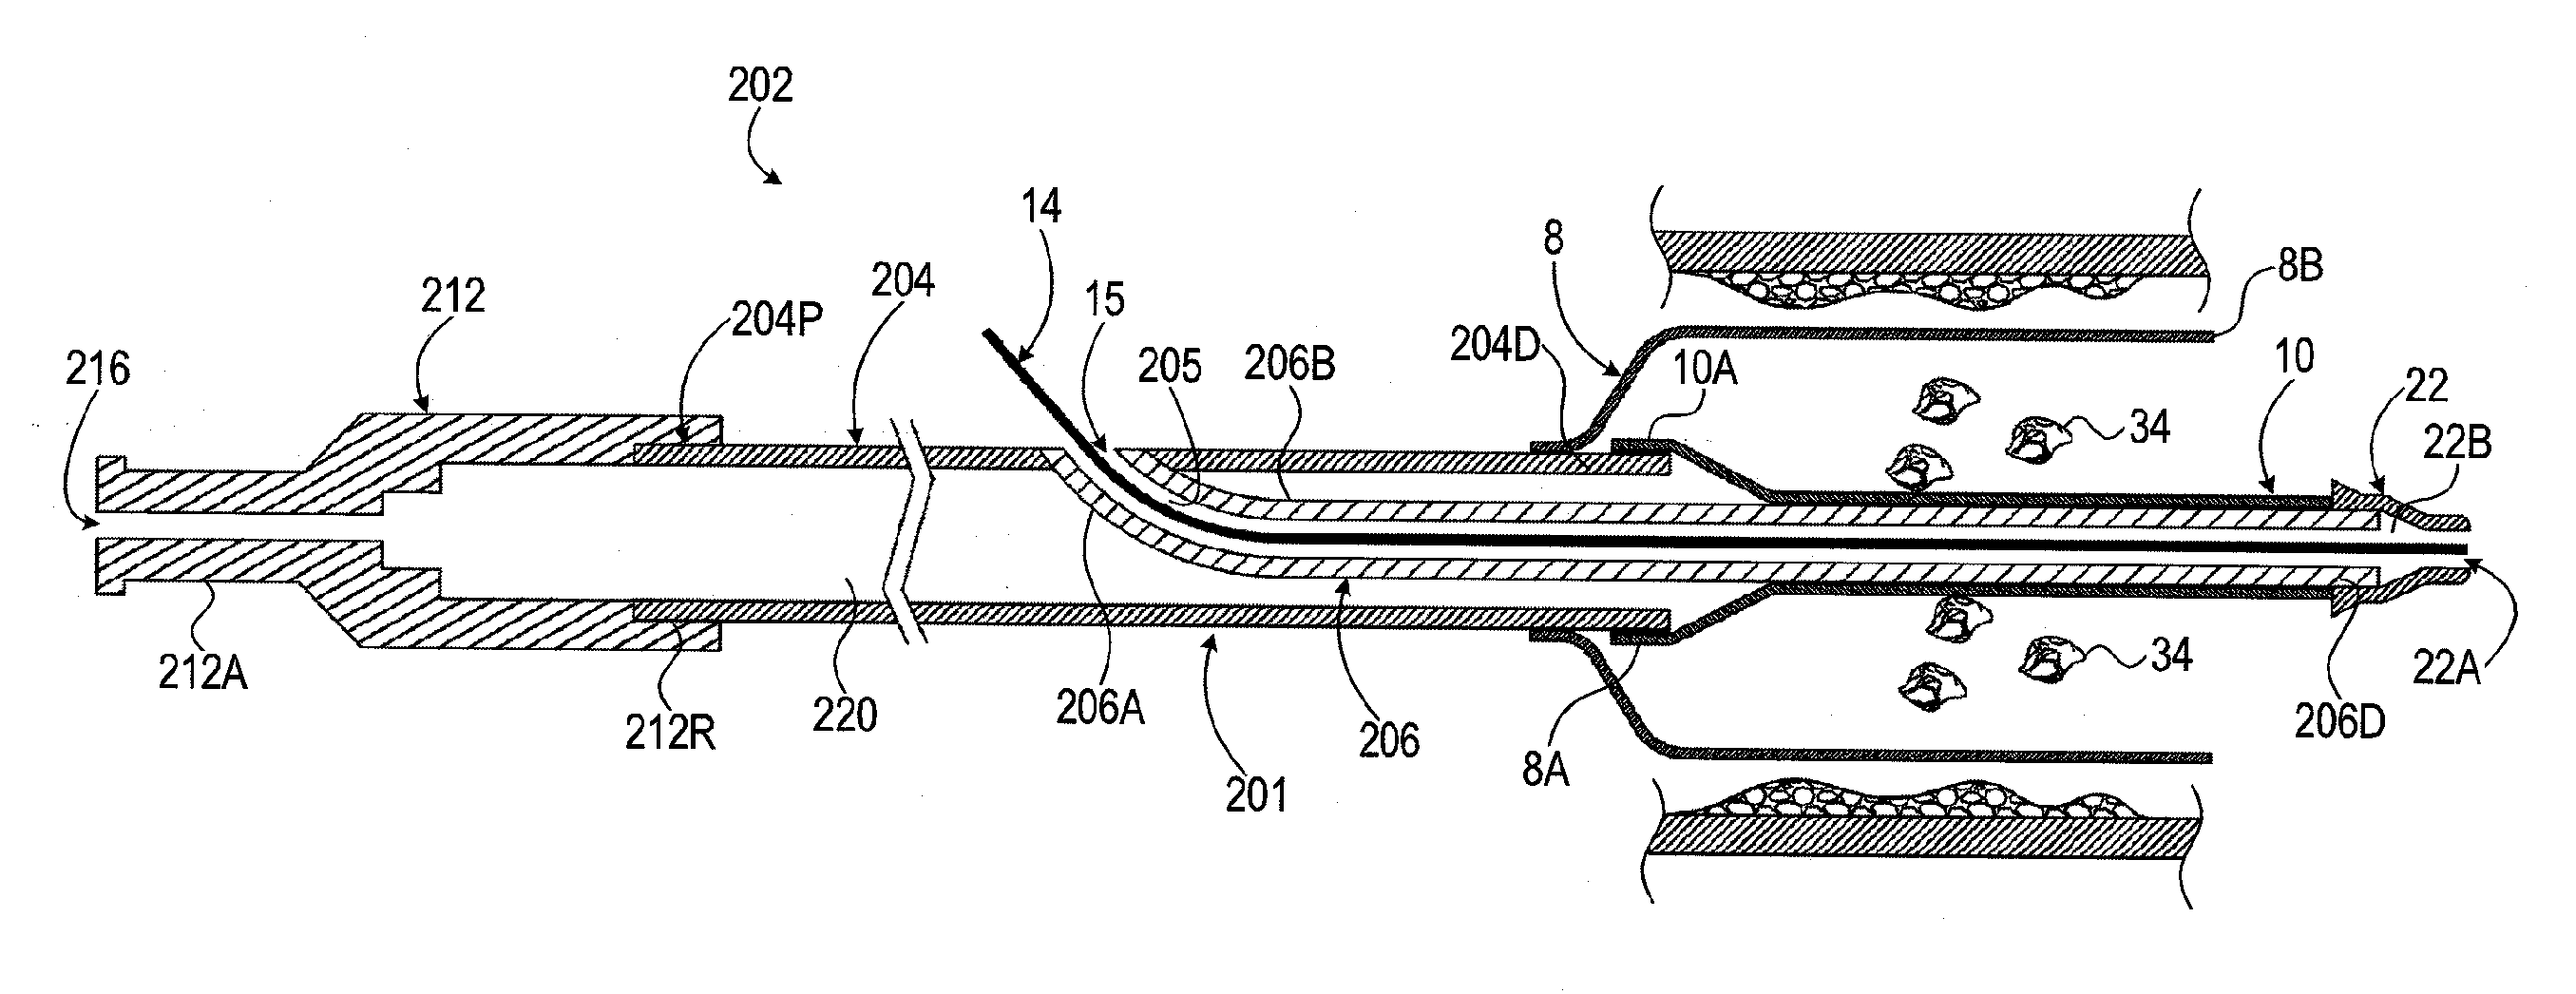 Balloon catheter and methods of use thereof